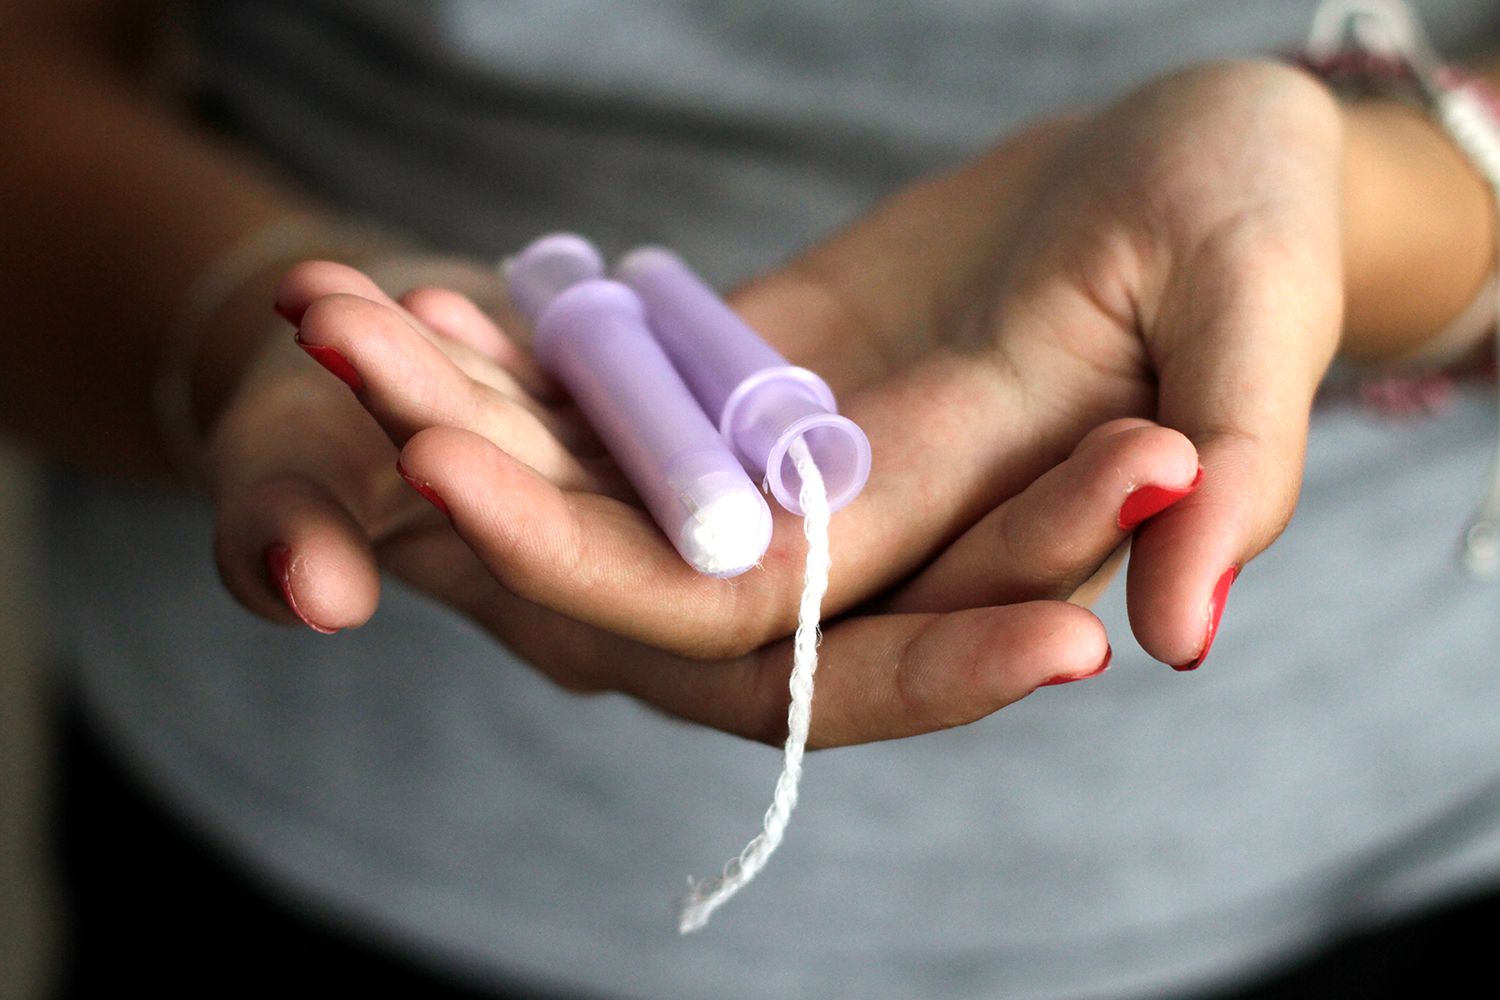 Tampax Has Not Made Their Tampons Smaller, Despite Social Media Claims [Video]